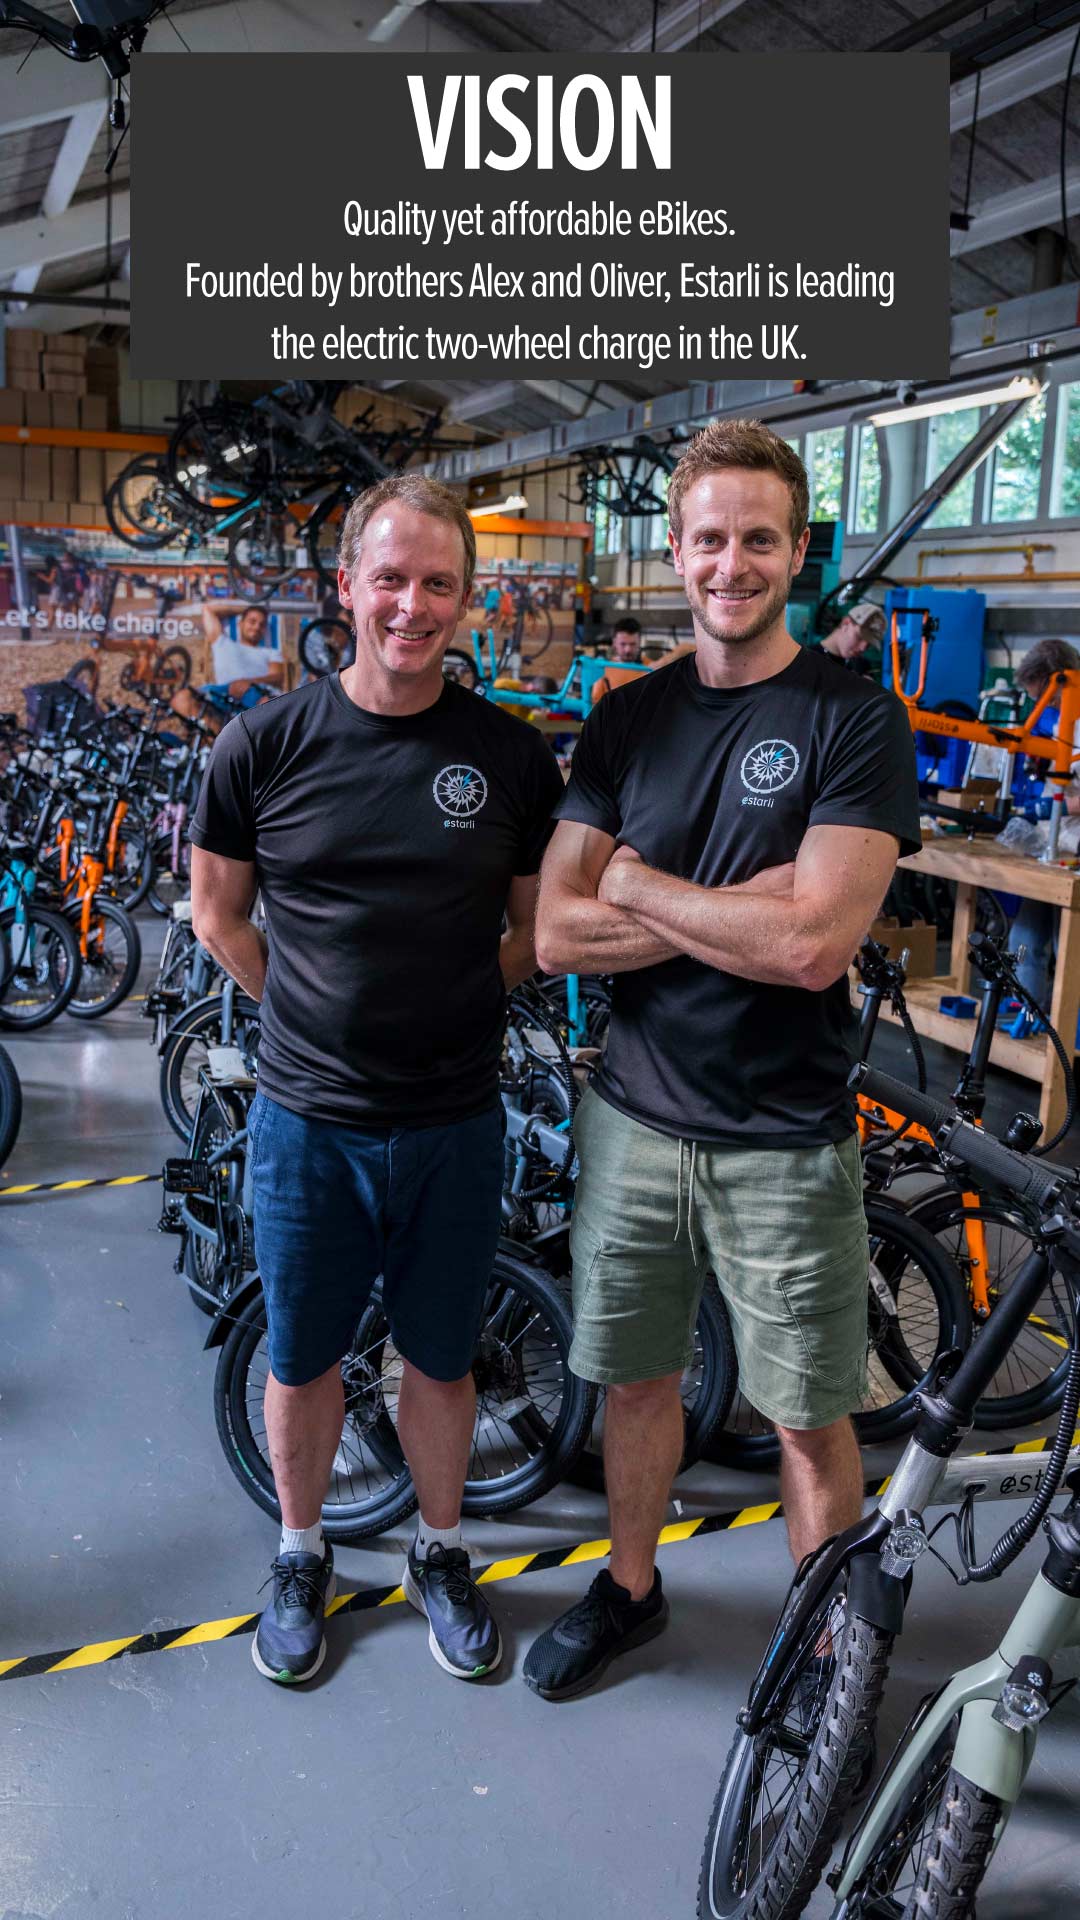 Quality yet affordable eBikes. Founded by brothers Alex and Oliver, Estarli is leading the electric two-wheel charge in the UK